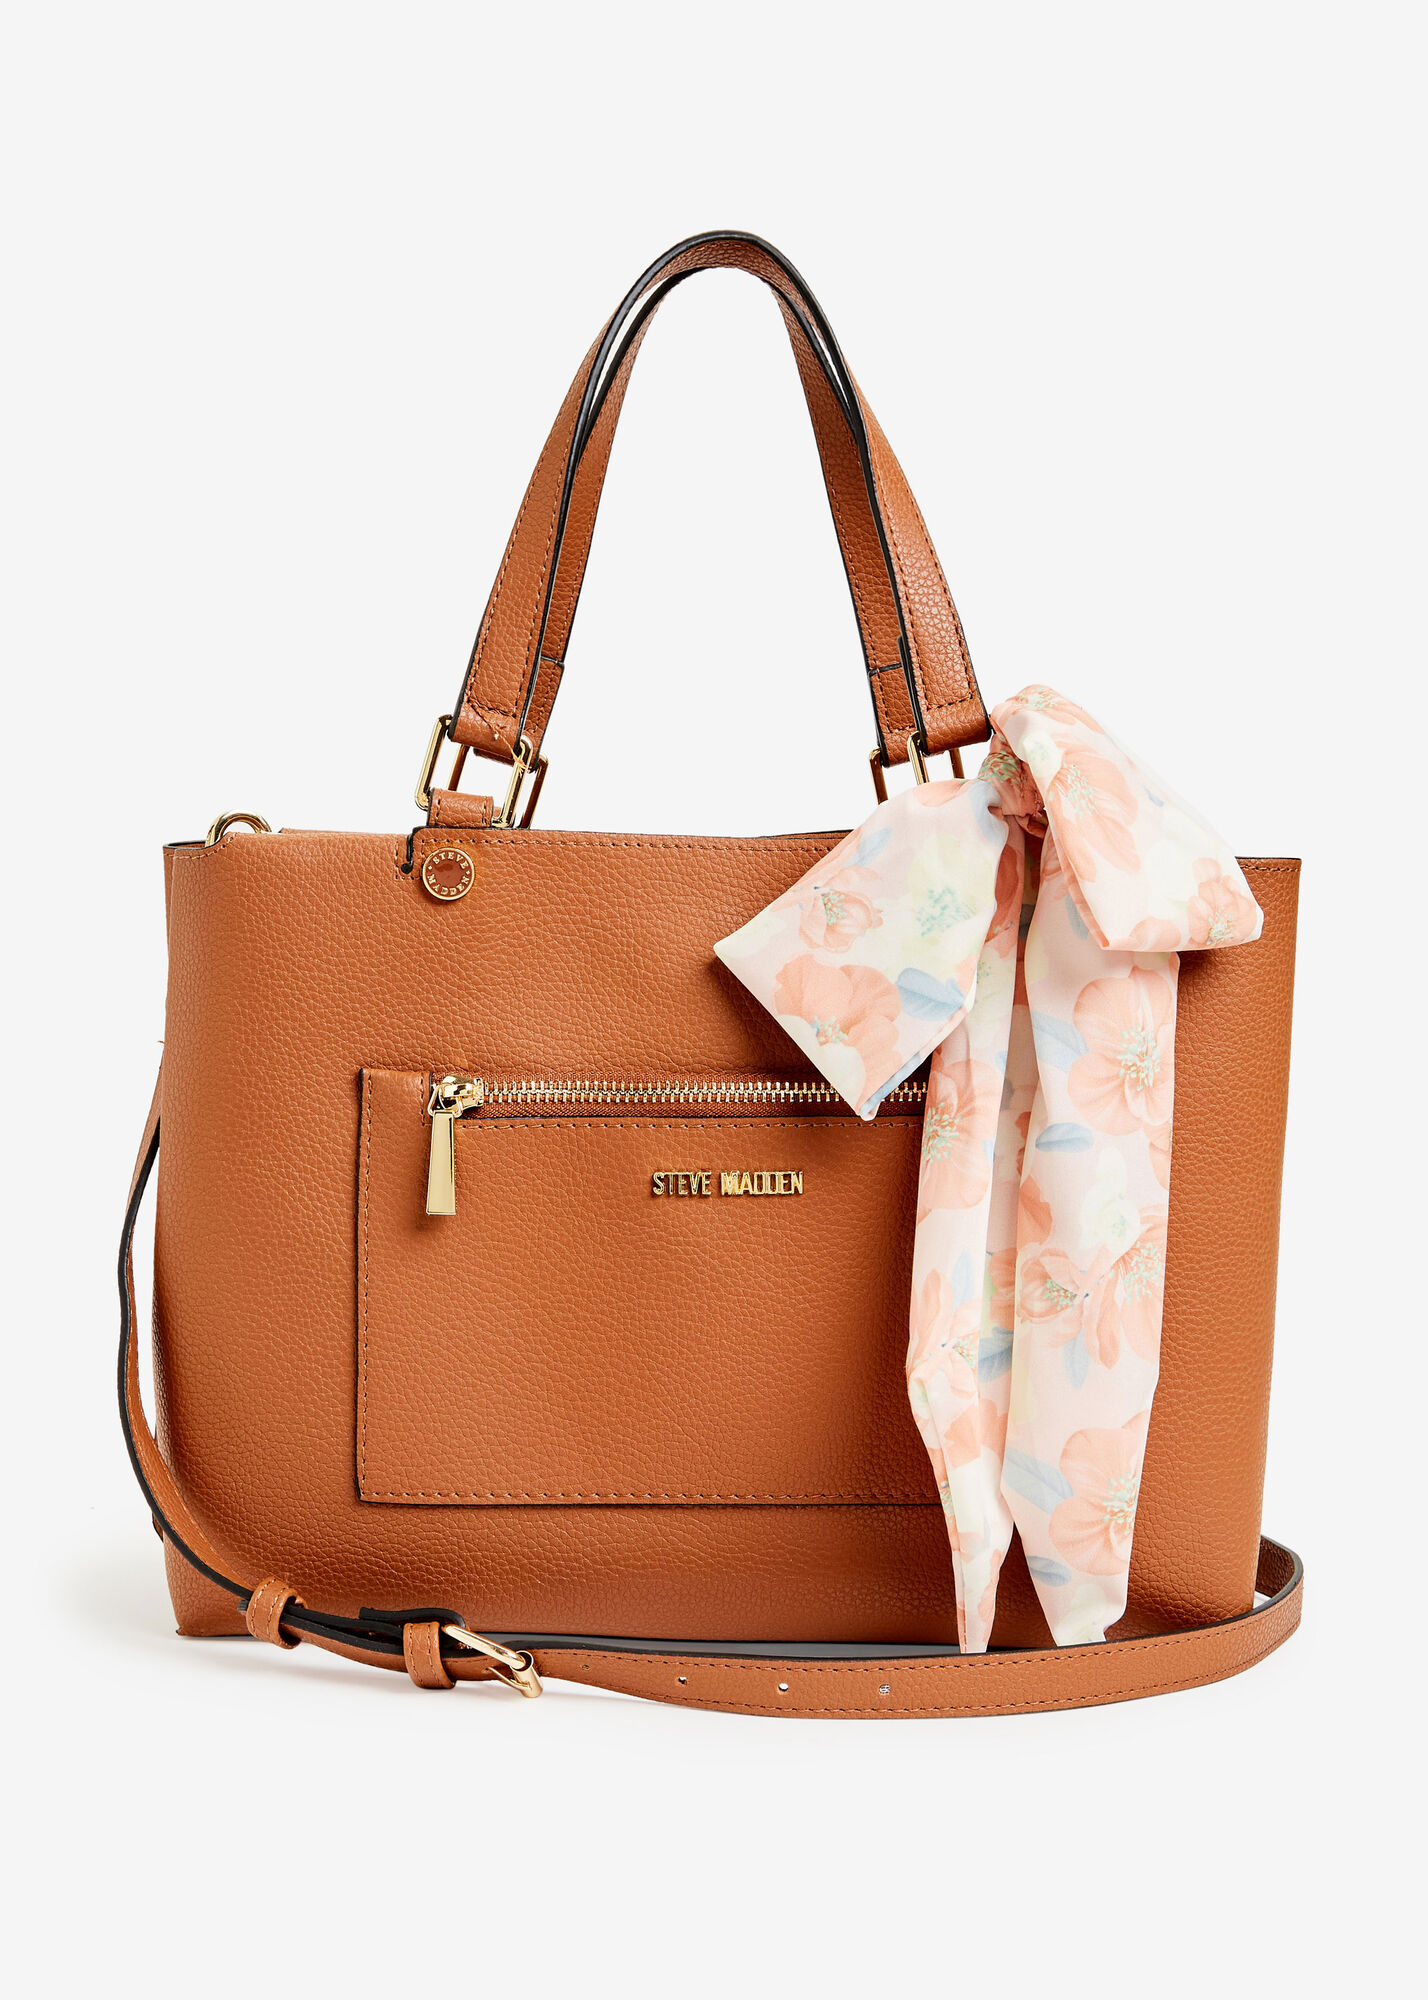 Mini Satchel Shoulder Bag by Steve Madden - Rent Clothes with Le Tote